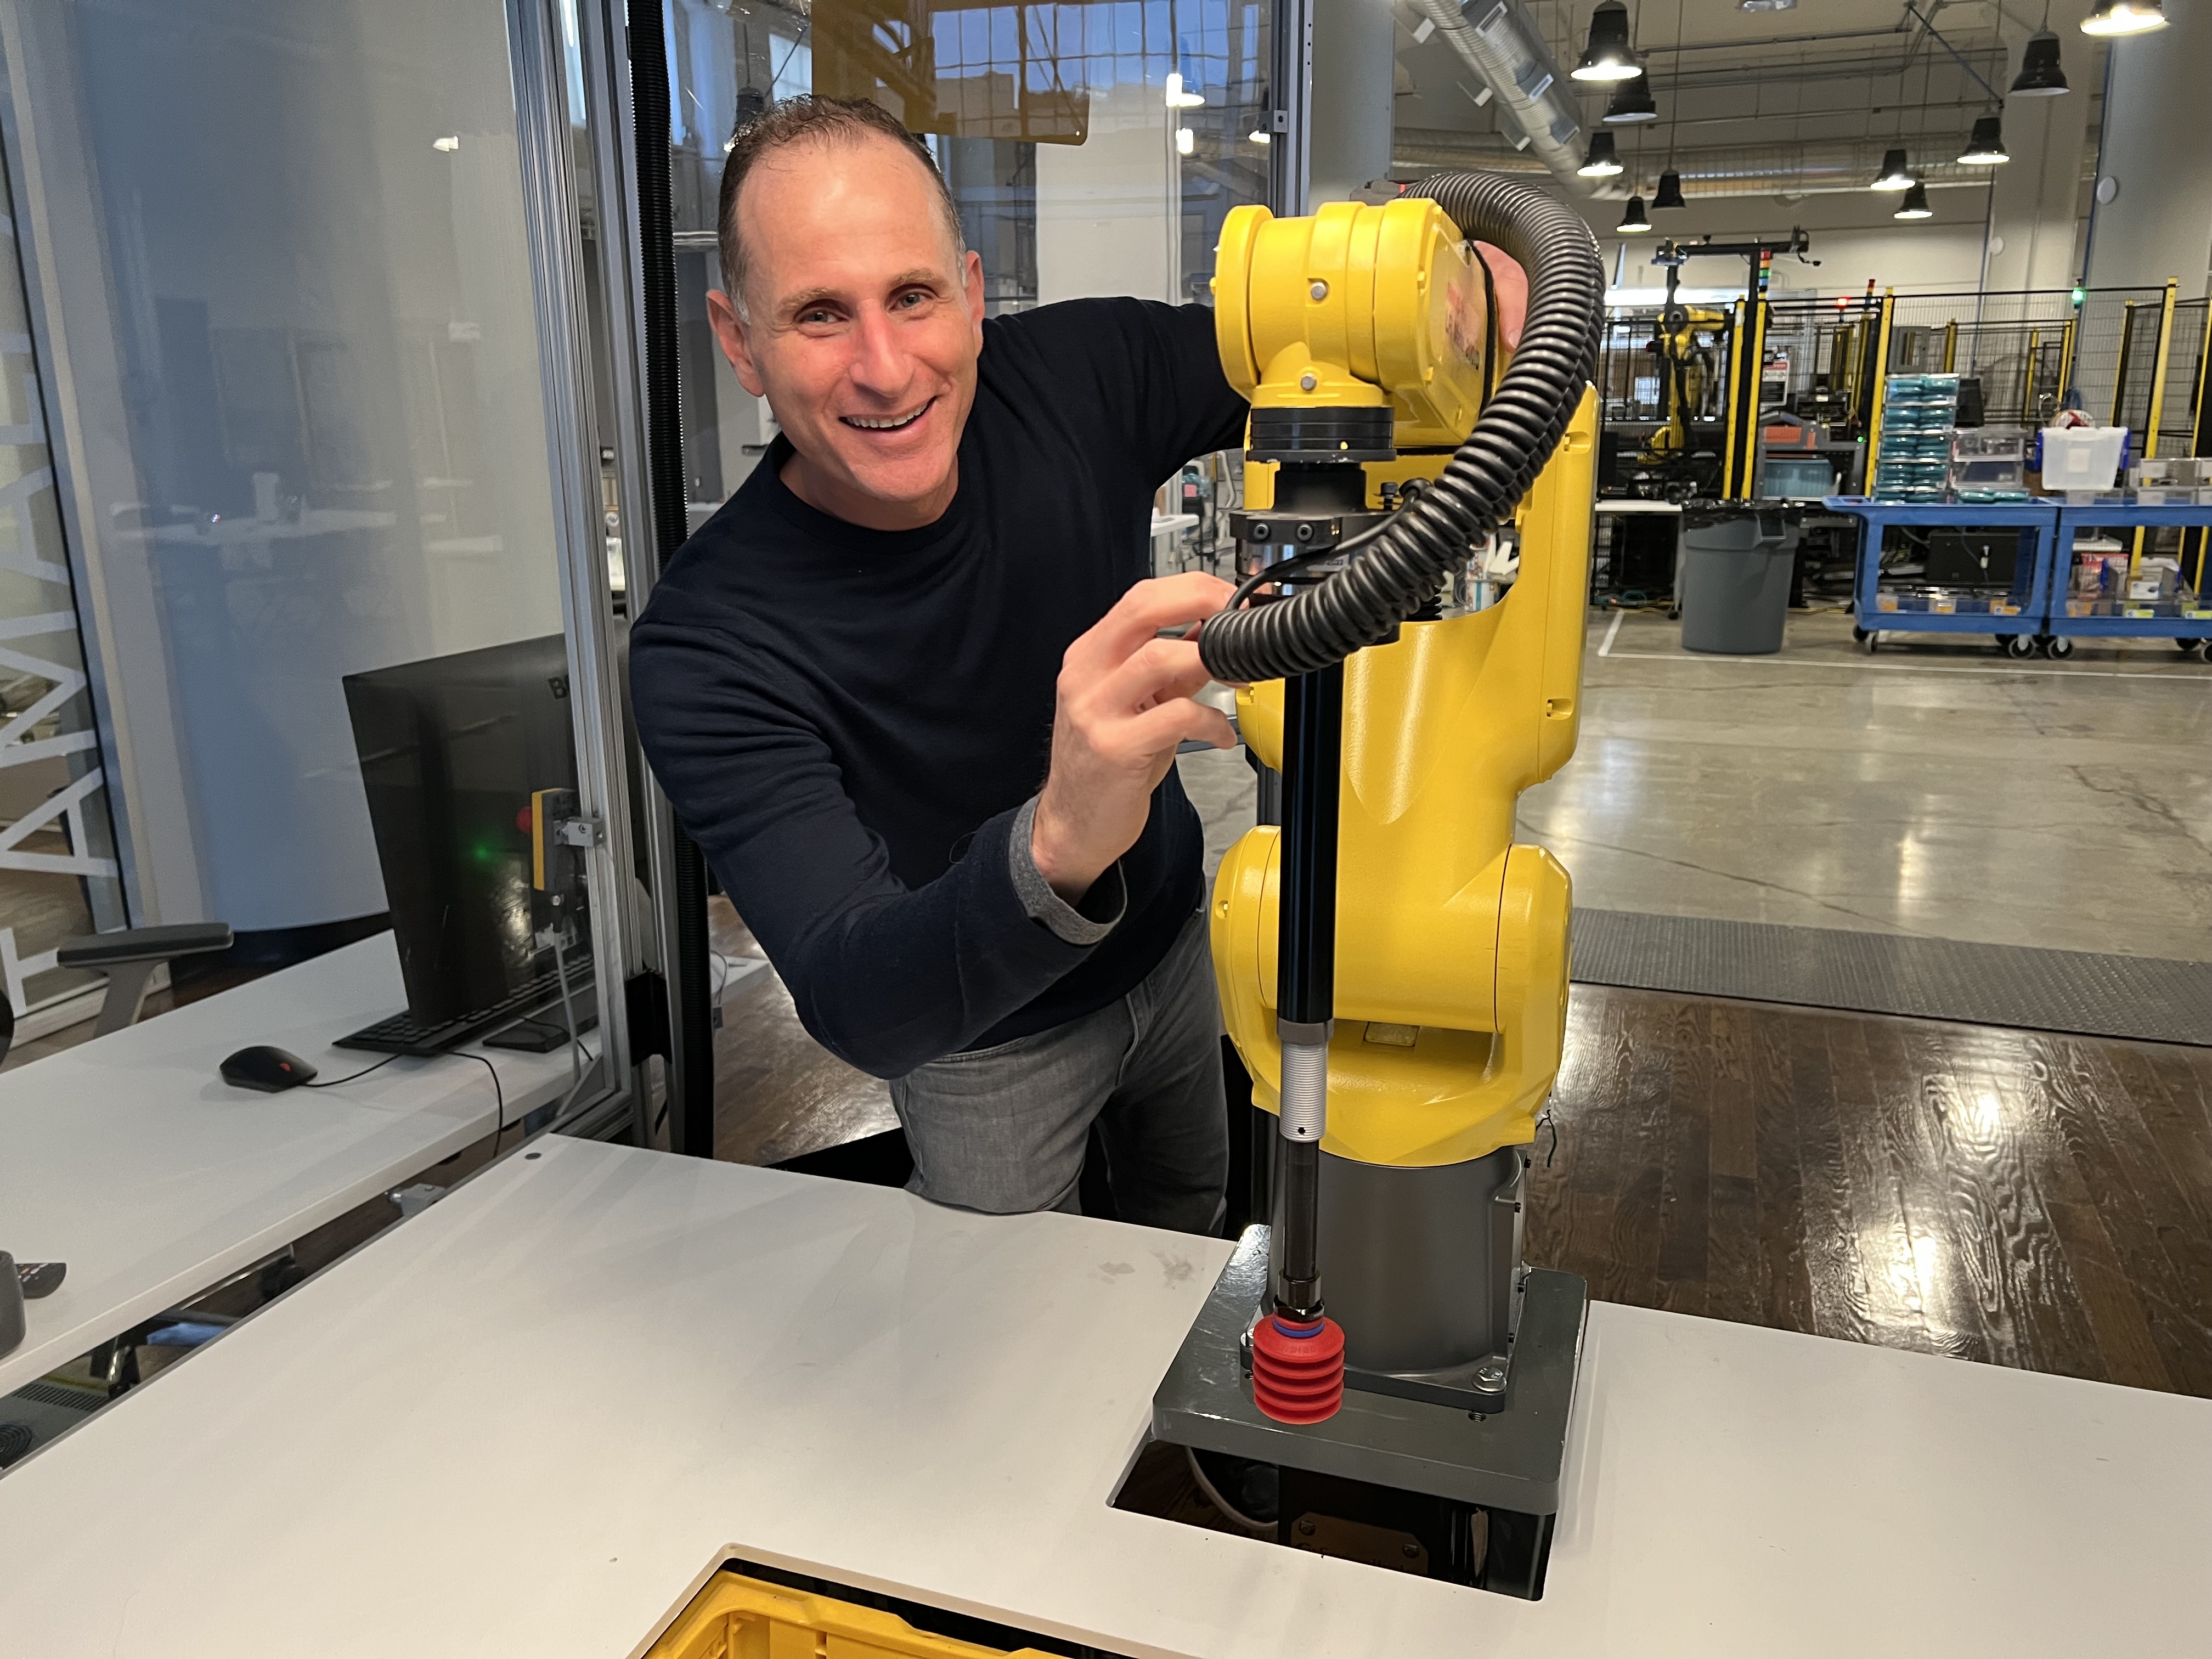 “OSARO is known for pushing the envelope on what industrial robots can achieve, and I can see enormous potential for expanding their capabilities in the e-commerce sector,” said ElKatcha.